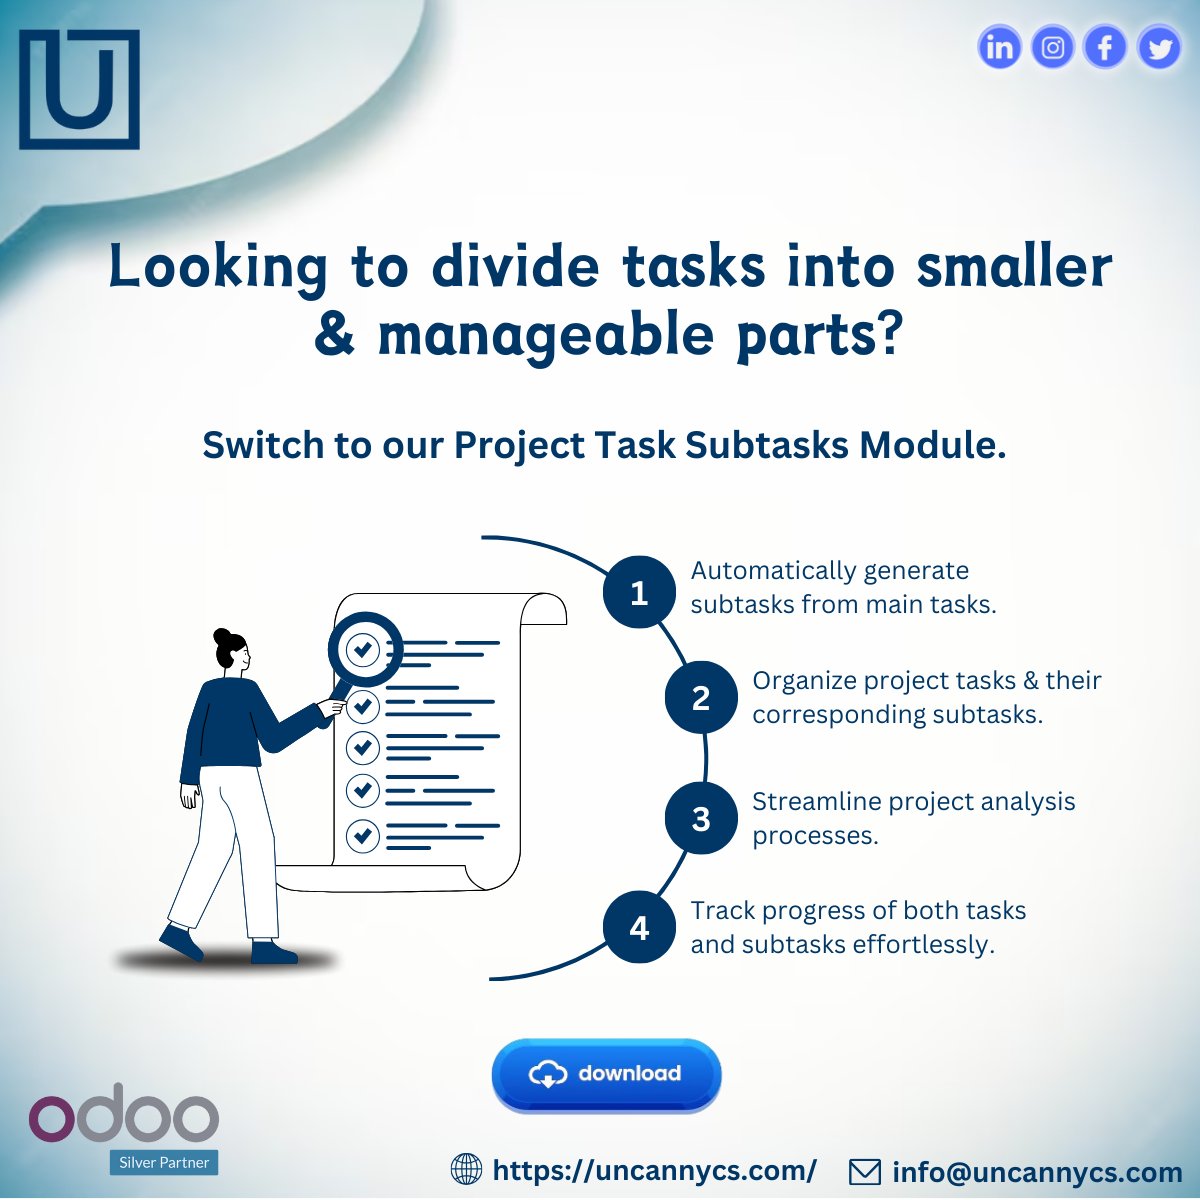 Calling all the managers!

Break down all your complex task into manageable ones with our Project Task Subtasks module.
apps.odoo.com/apps/modules/1…

#Uncannycs #ProjectManagement #TaskManagementTips #Subtasks #ProductivityTips #Efficiency #Managers #breakdowncomplexity